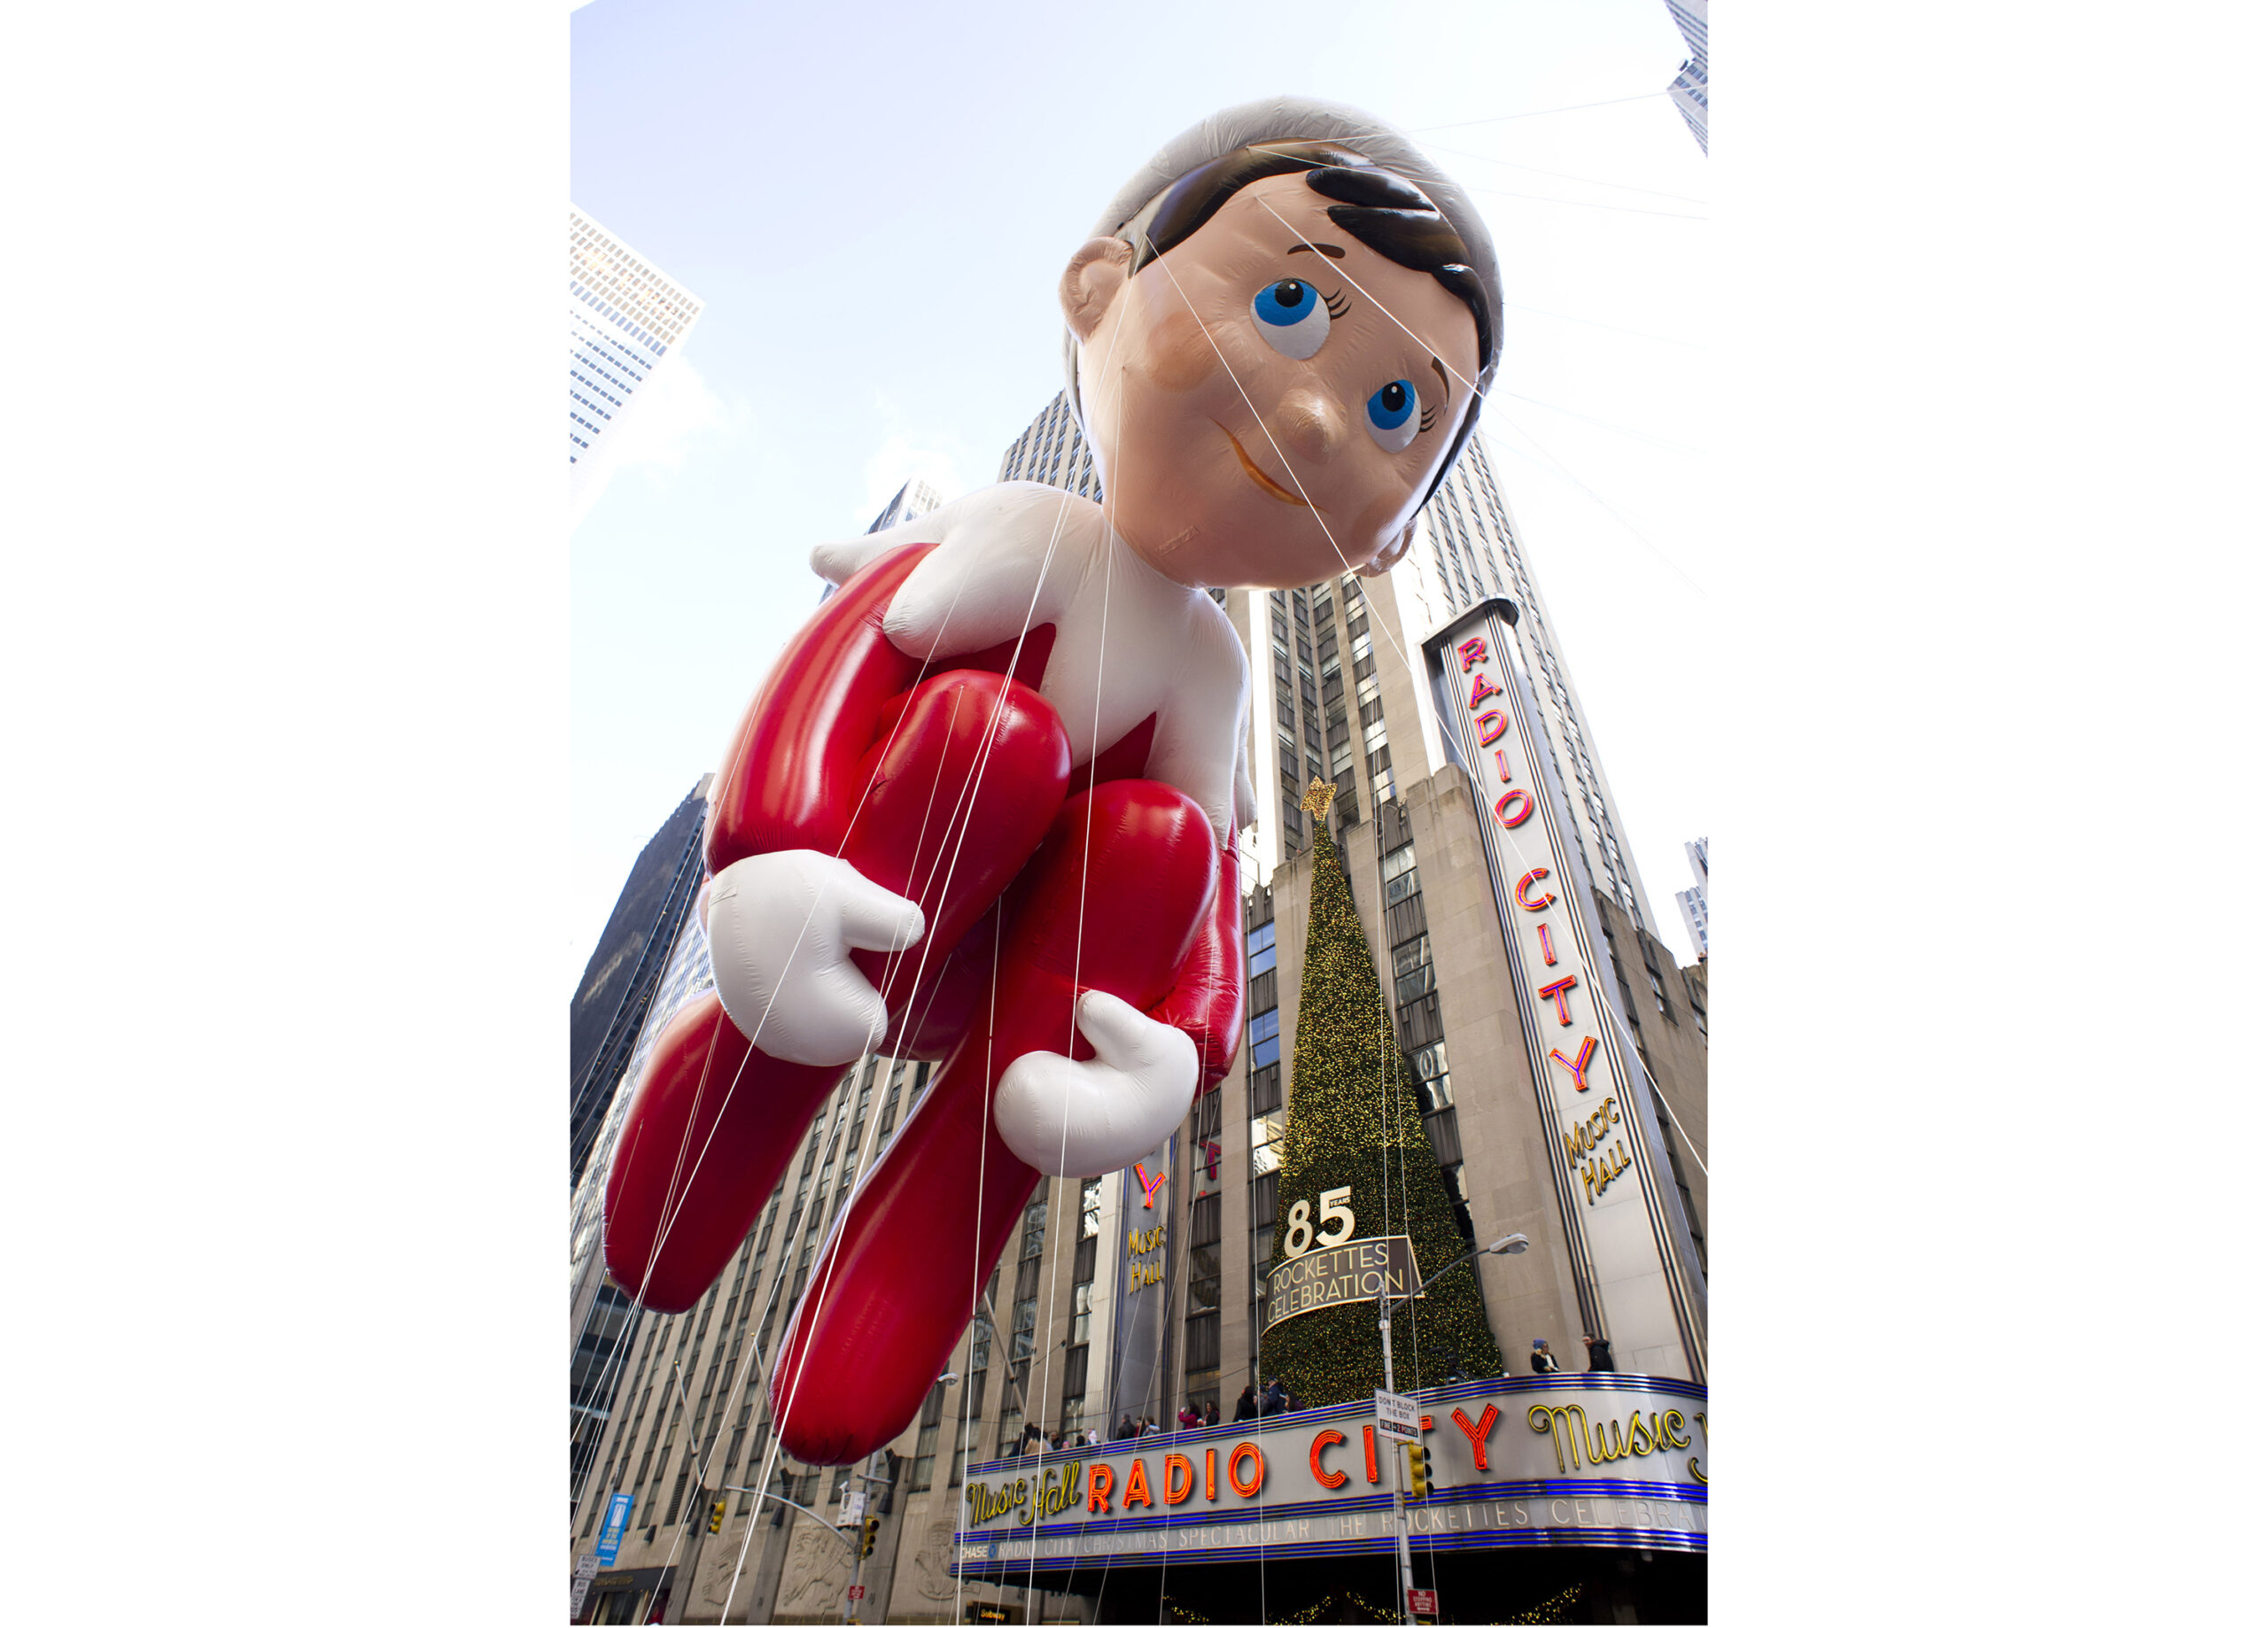 FILE - The Elf on the Shelf balloon floats in the Macy's Thanksgiving Day Parade in New York in New York on Nov. 22, 2012. The pandemic may have upended most traditions this holiday season but the annual New York City parade will still march on with balloons, dancers, floats, Broadway shows and Santa — albeit this time heavily tweaked for safety. (AP Photo/Charles Sykes, File)